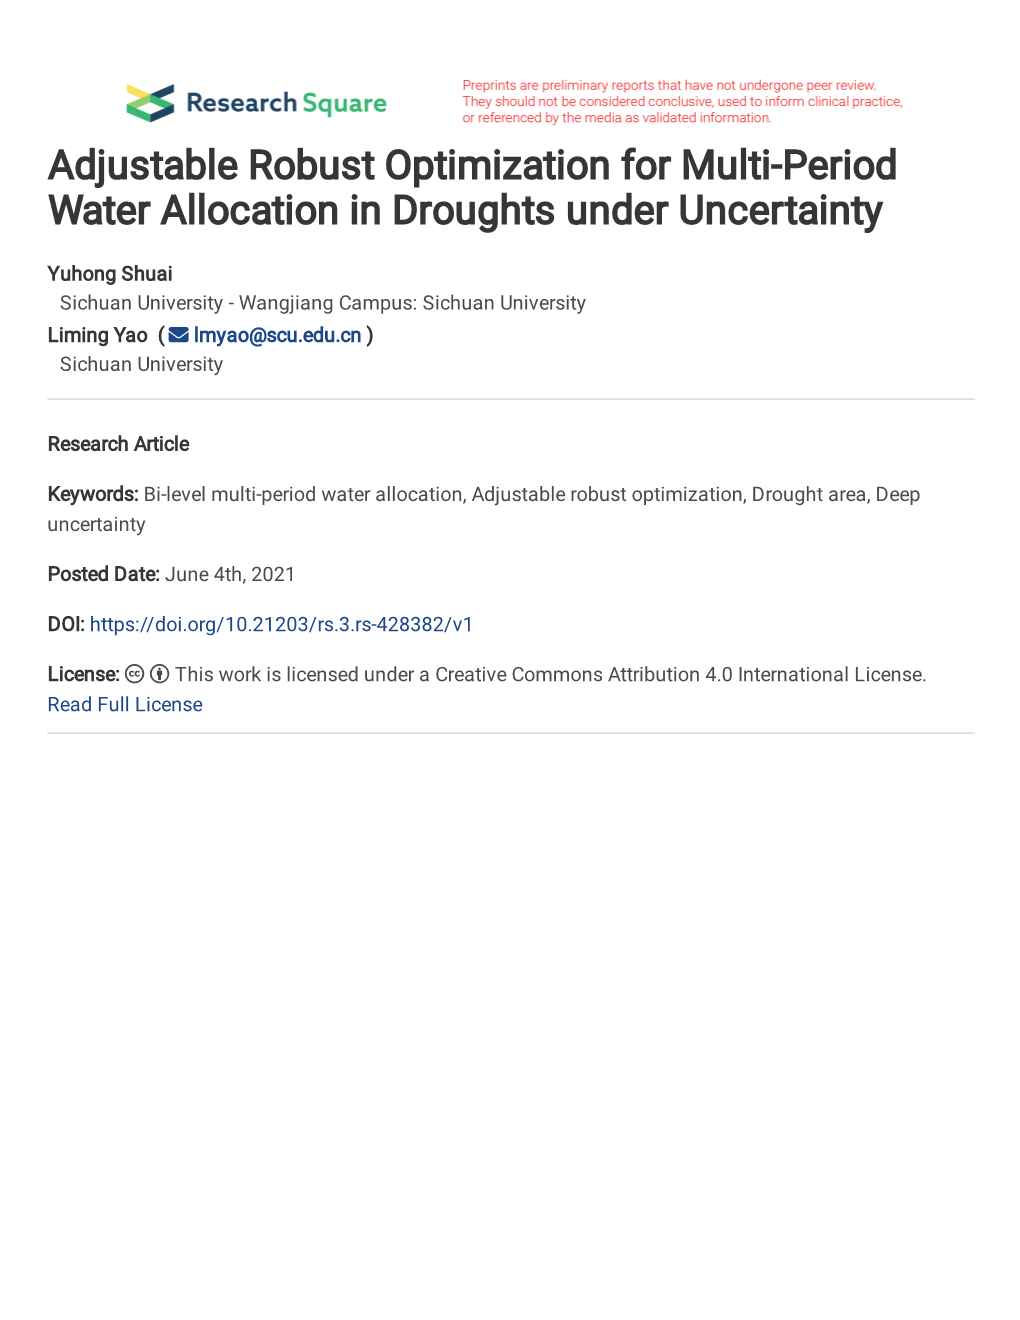 Adjustable Robust Optimization for Multi-Period Water Allocation in Droughts Under Uncertainty